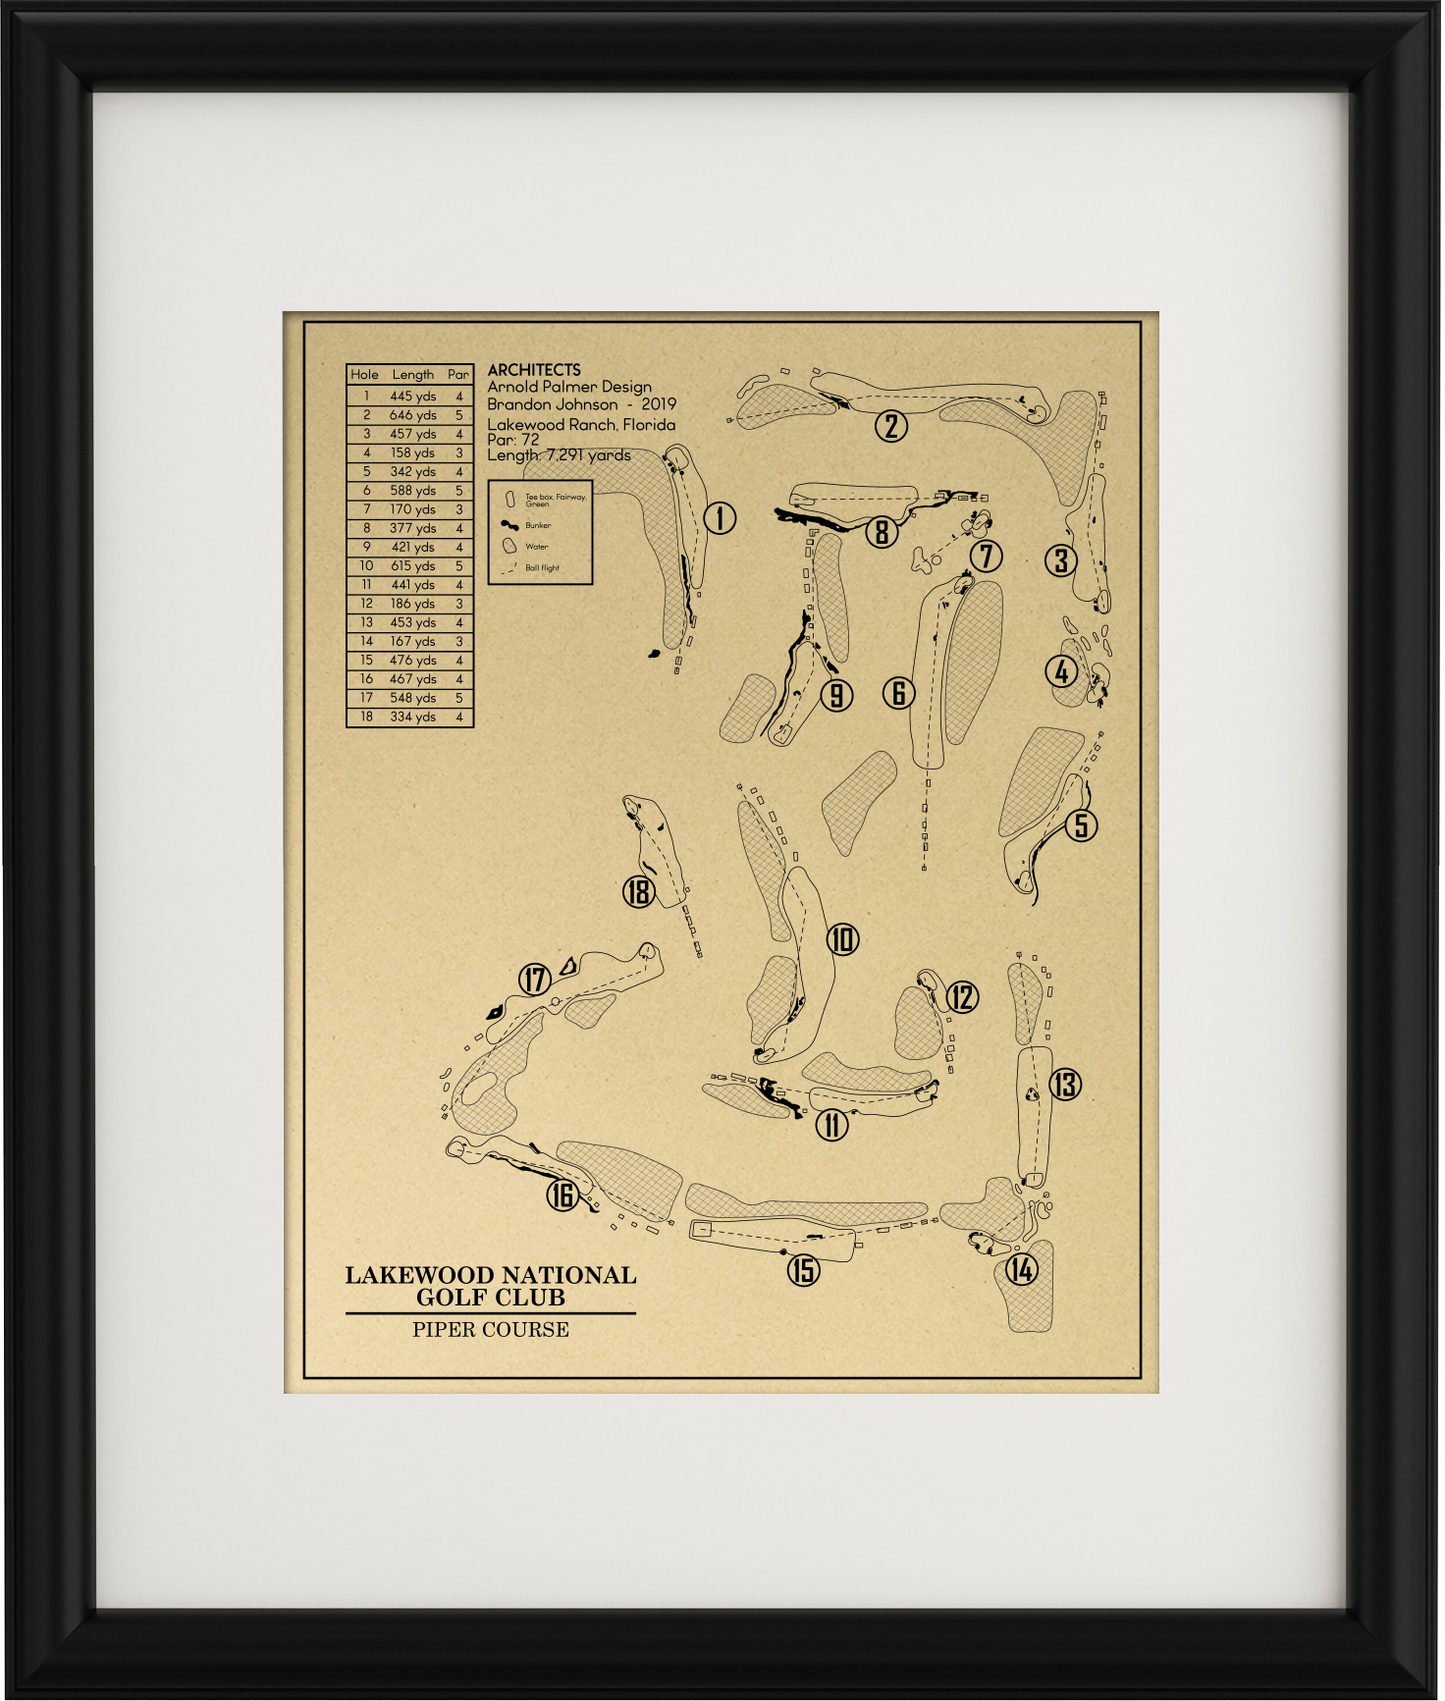 Lakewood National Golf Club Piper Course Outline (Print)